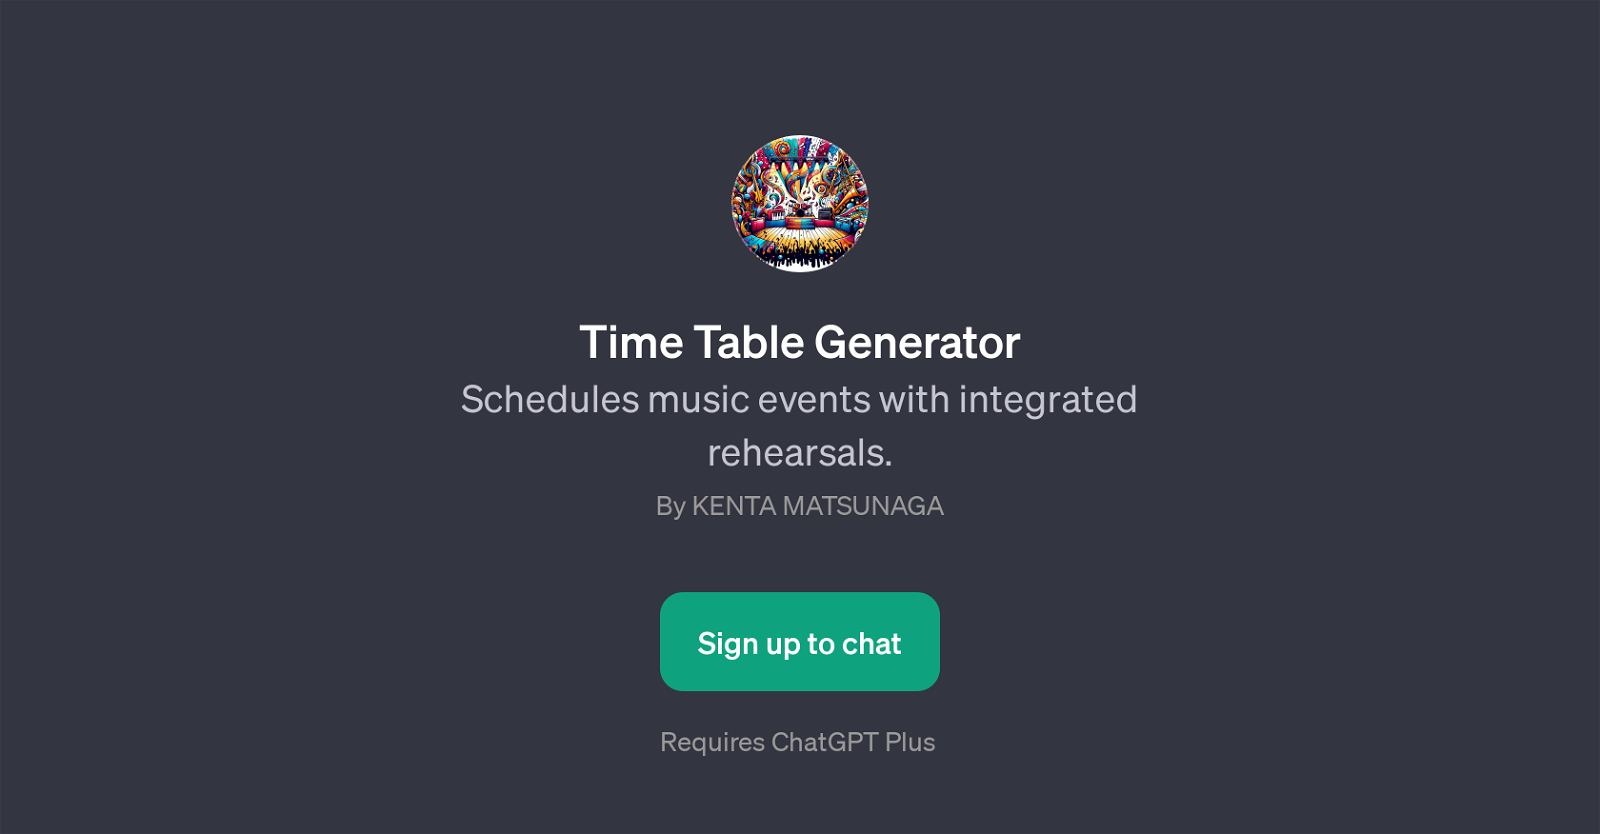 Time Table Generator website